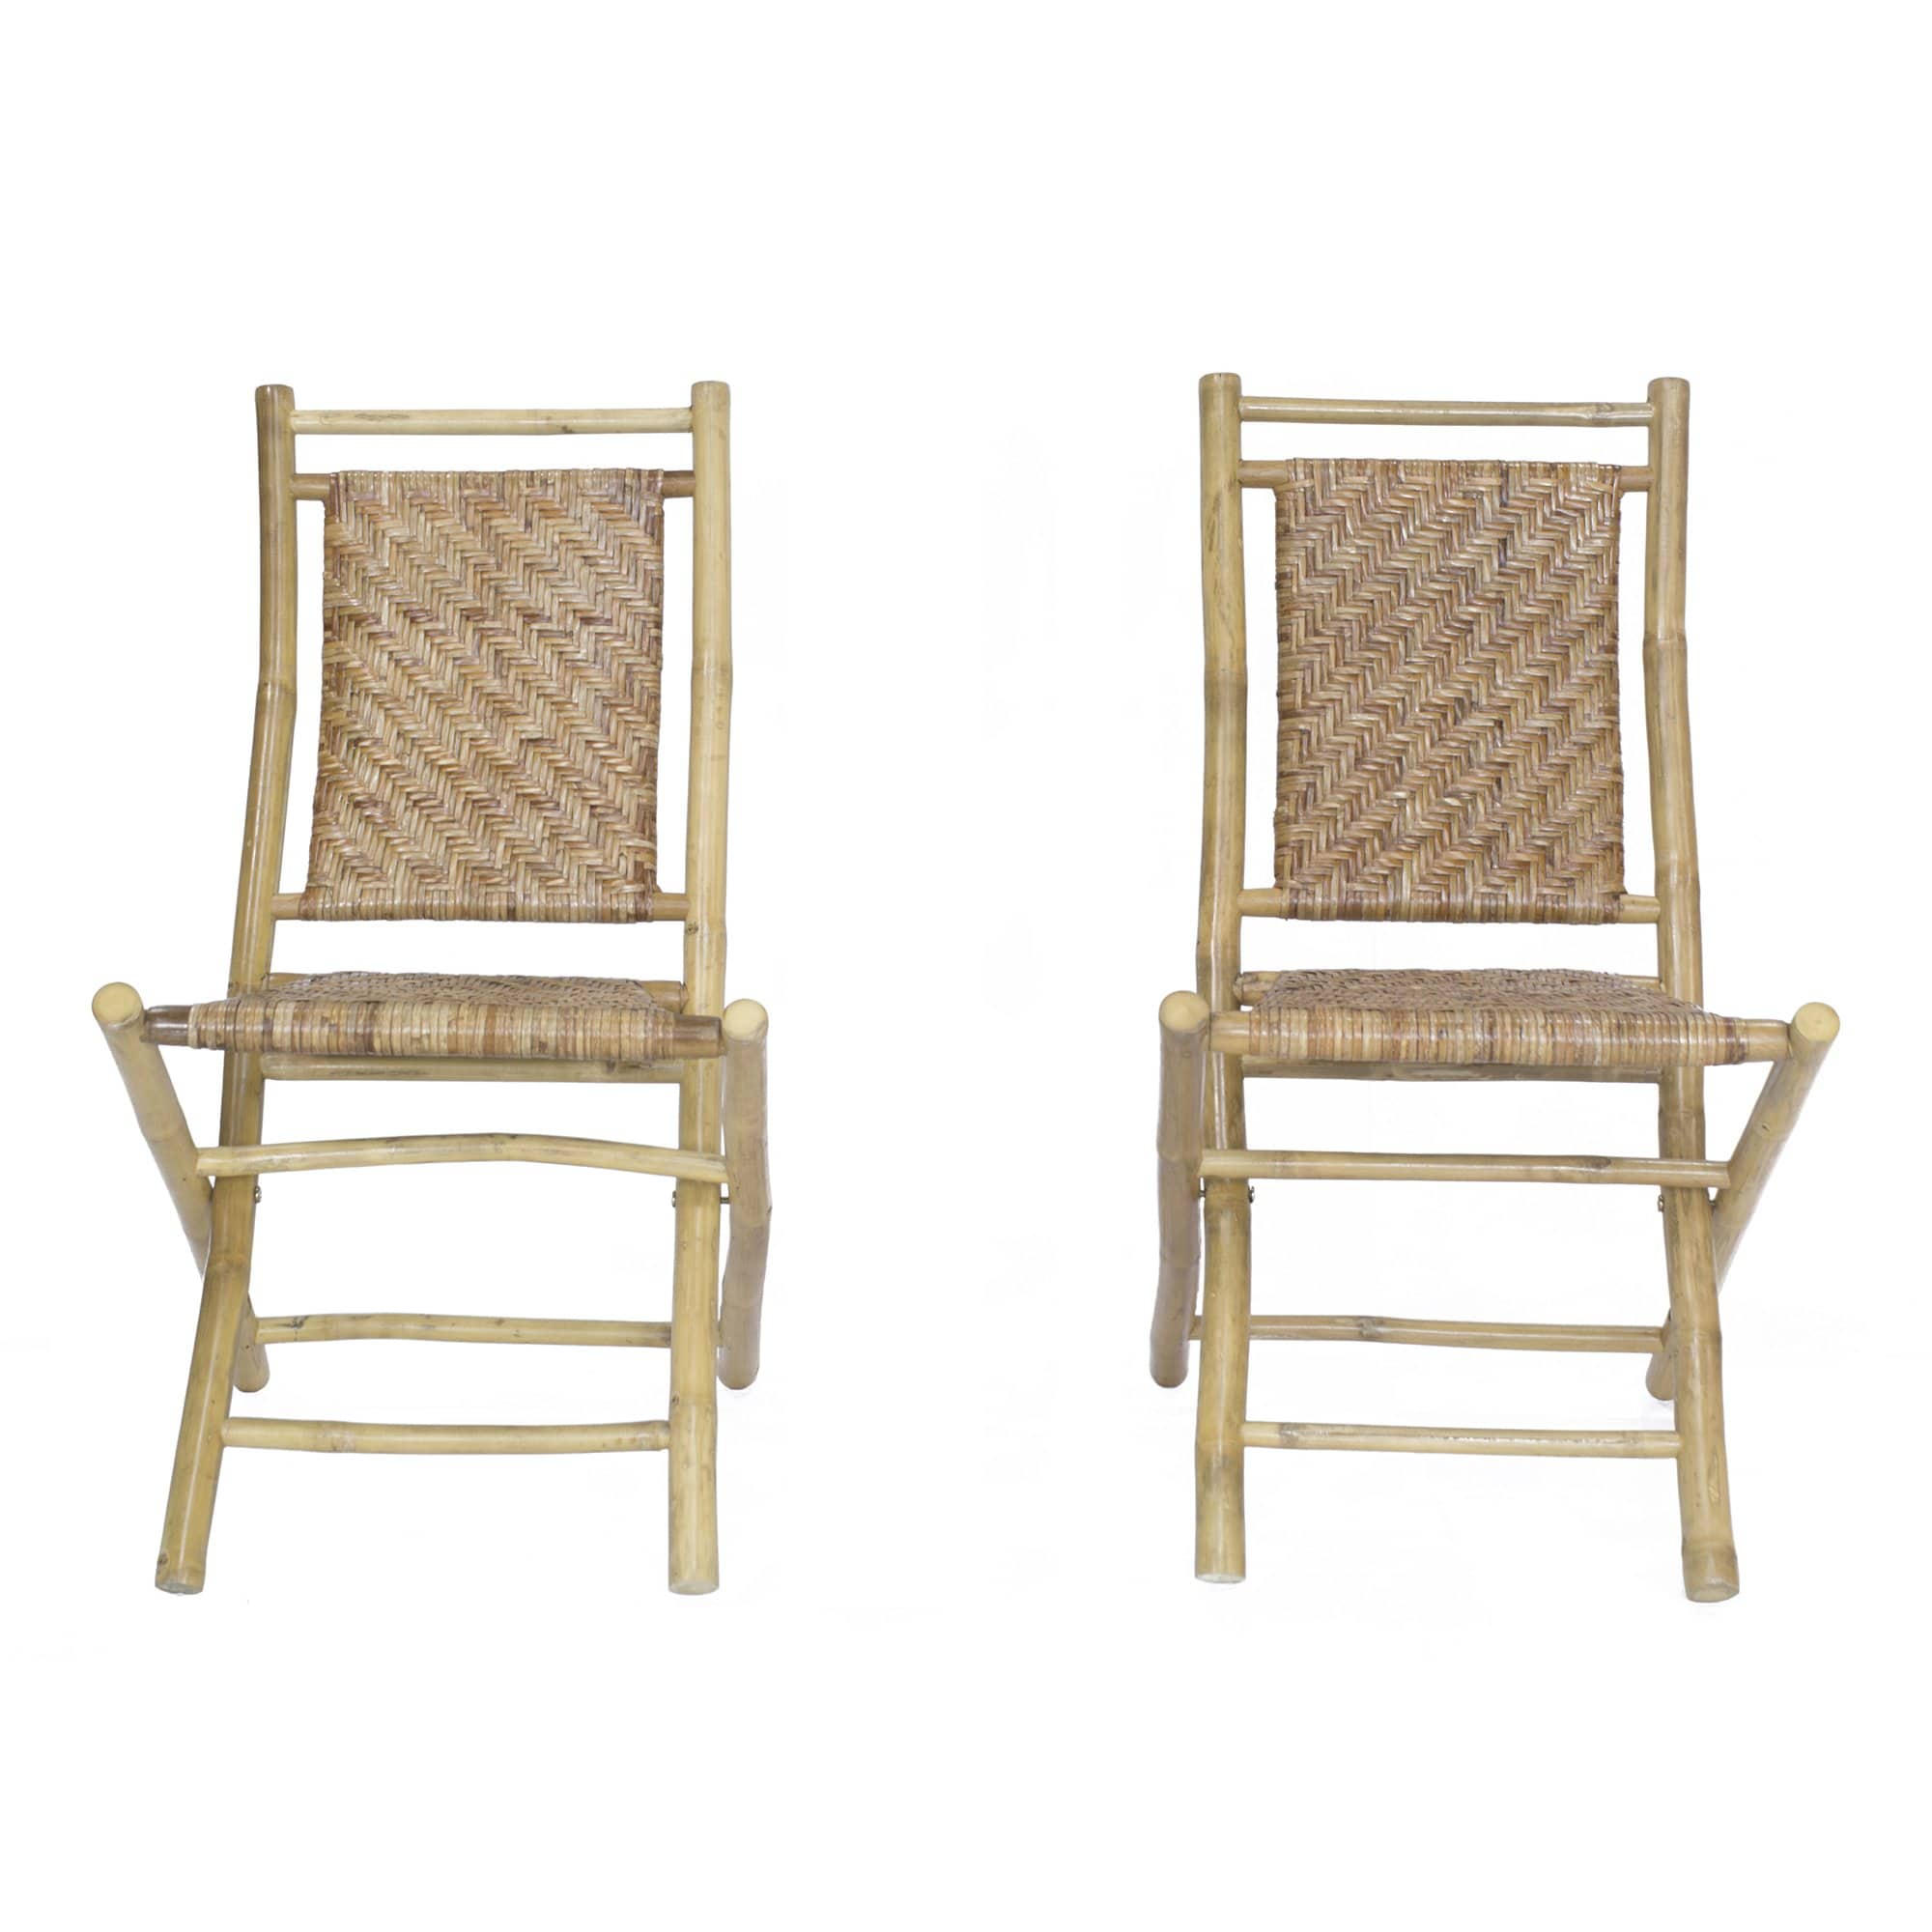 HomeRoots Outdoors Outdoor Folding Chairs Brown / Bamboo 36" Brown Bamboo Folding Chair with a Rattan Skin Chevron Weave